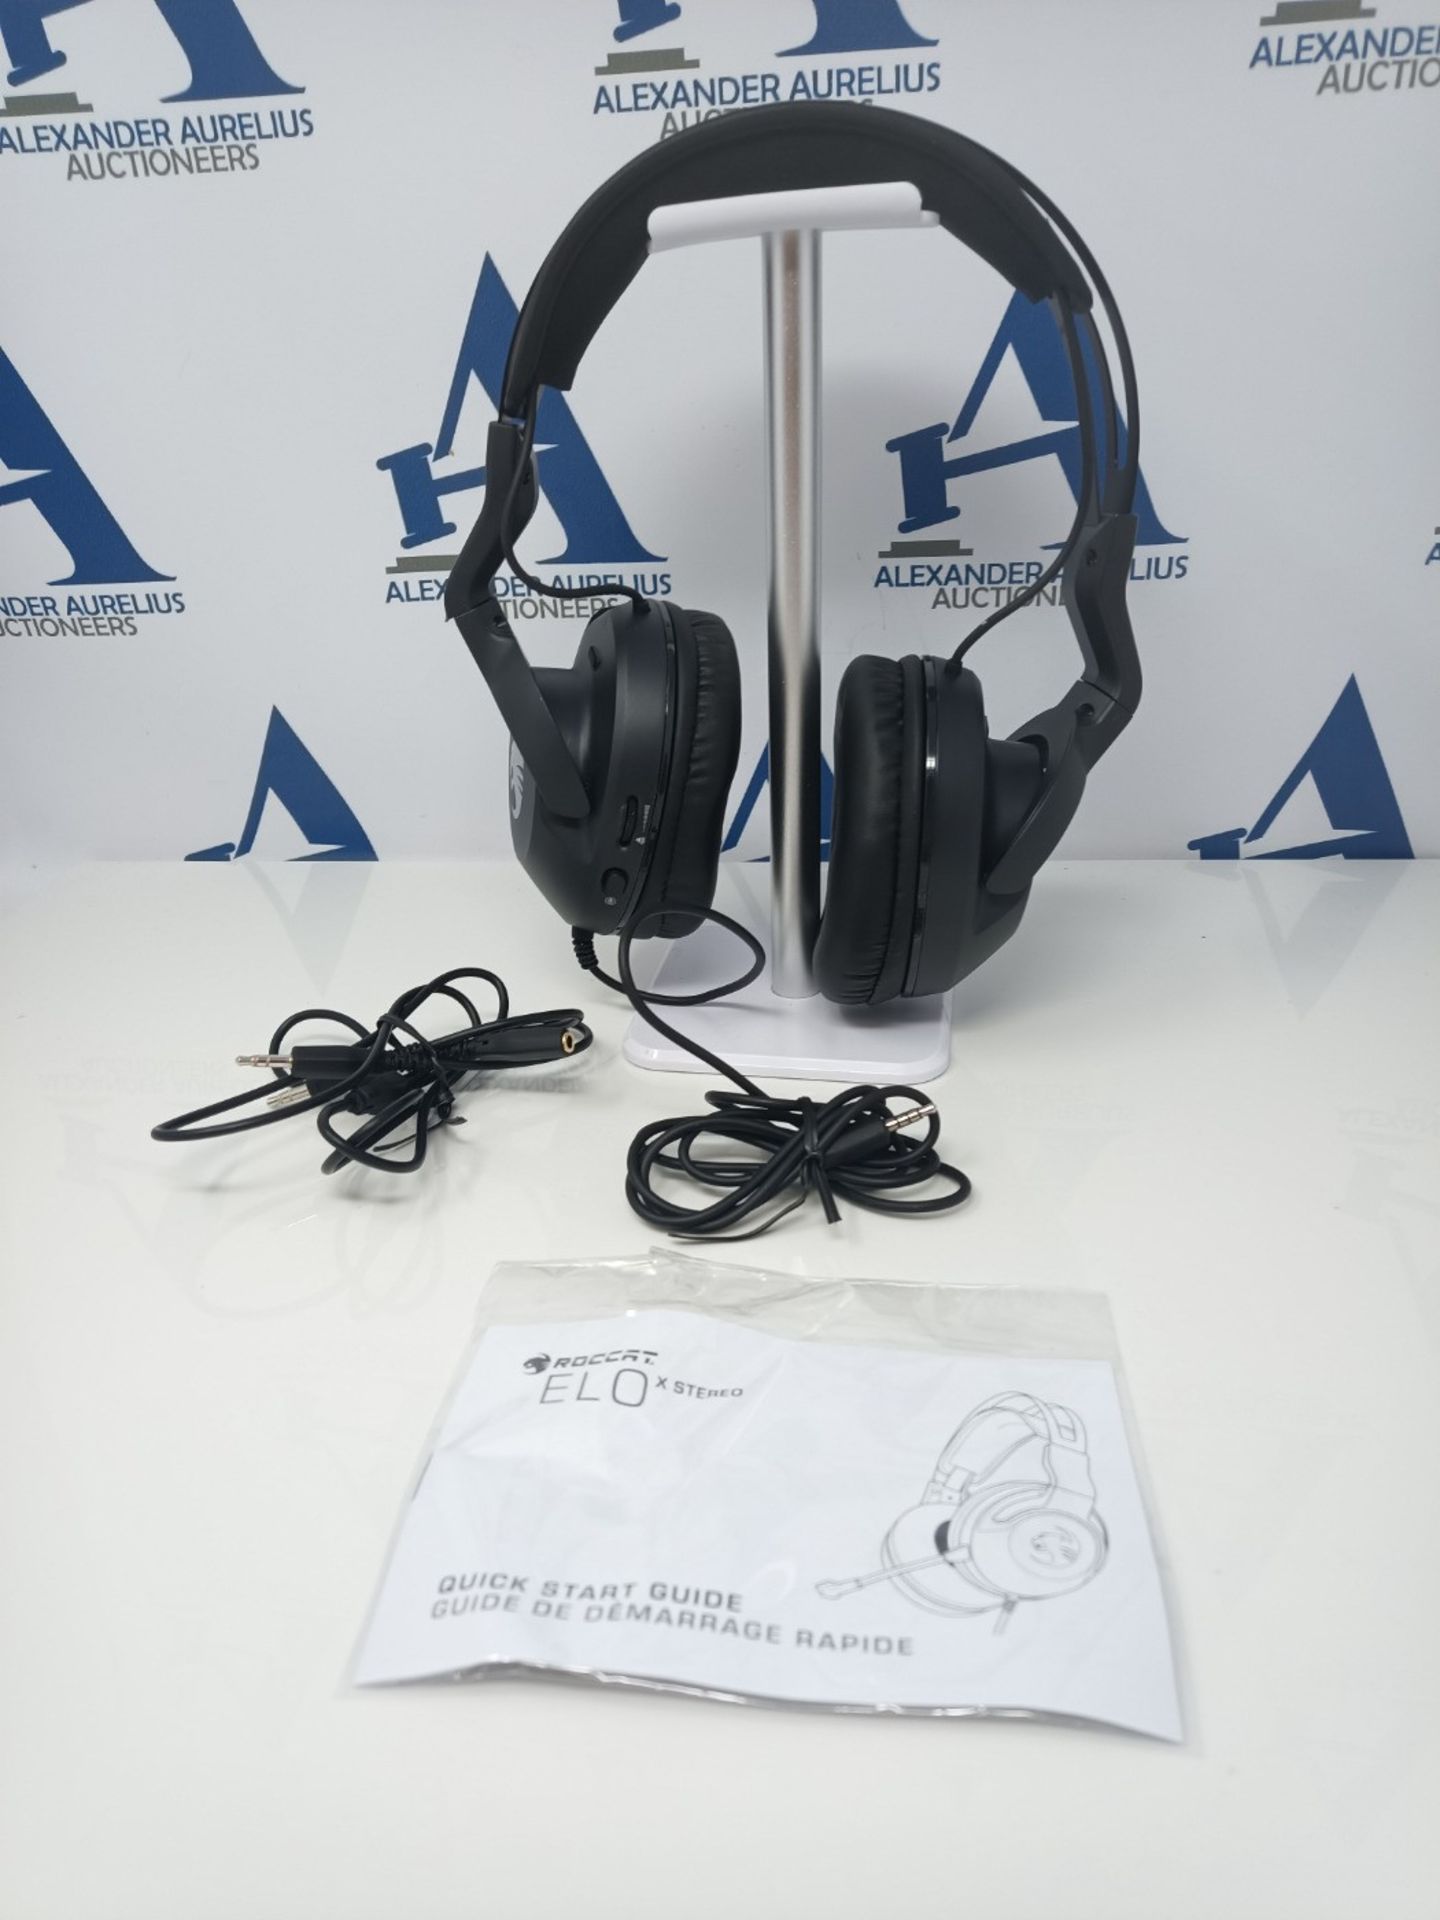 Roccat Elo X Stereo - Gaming Headset for PC, Mac, Xbox, PlayStation & mobile devices - Image 3 of 3